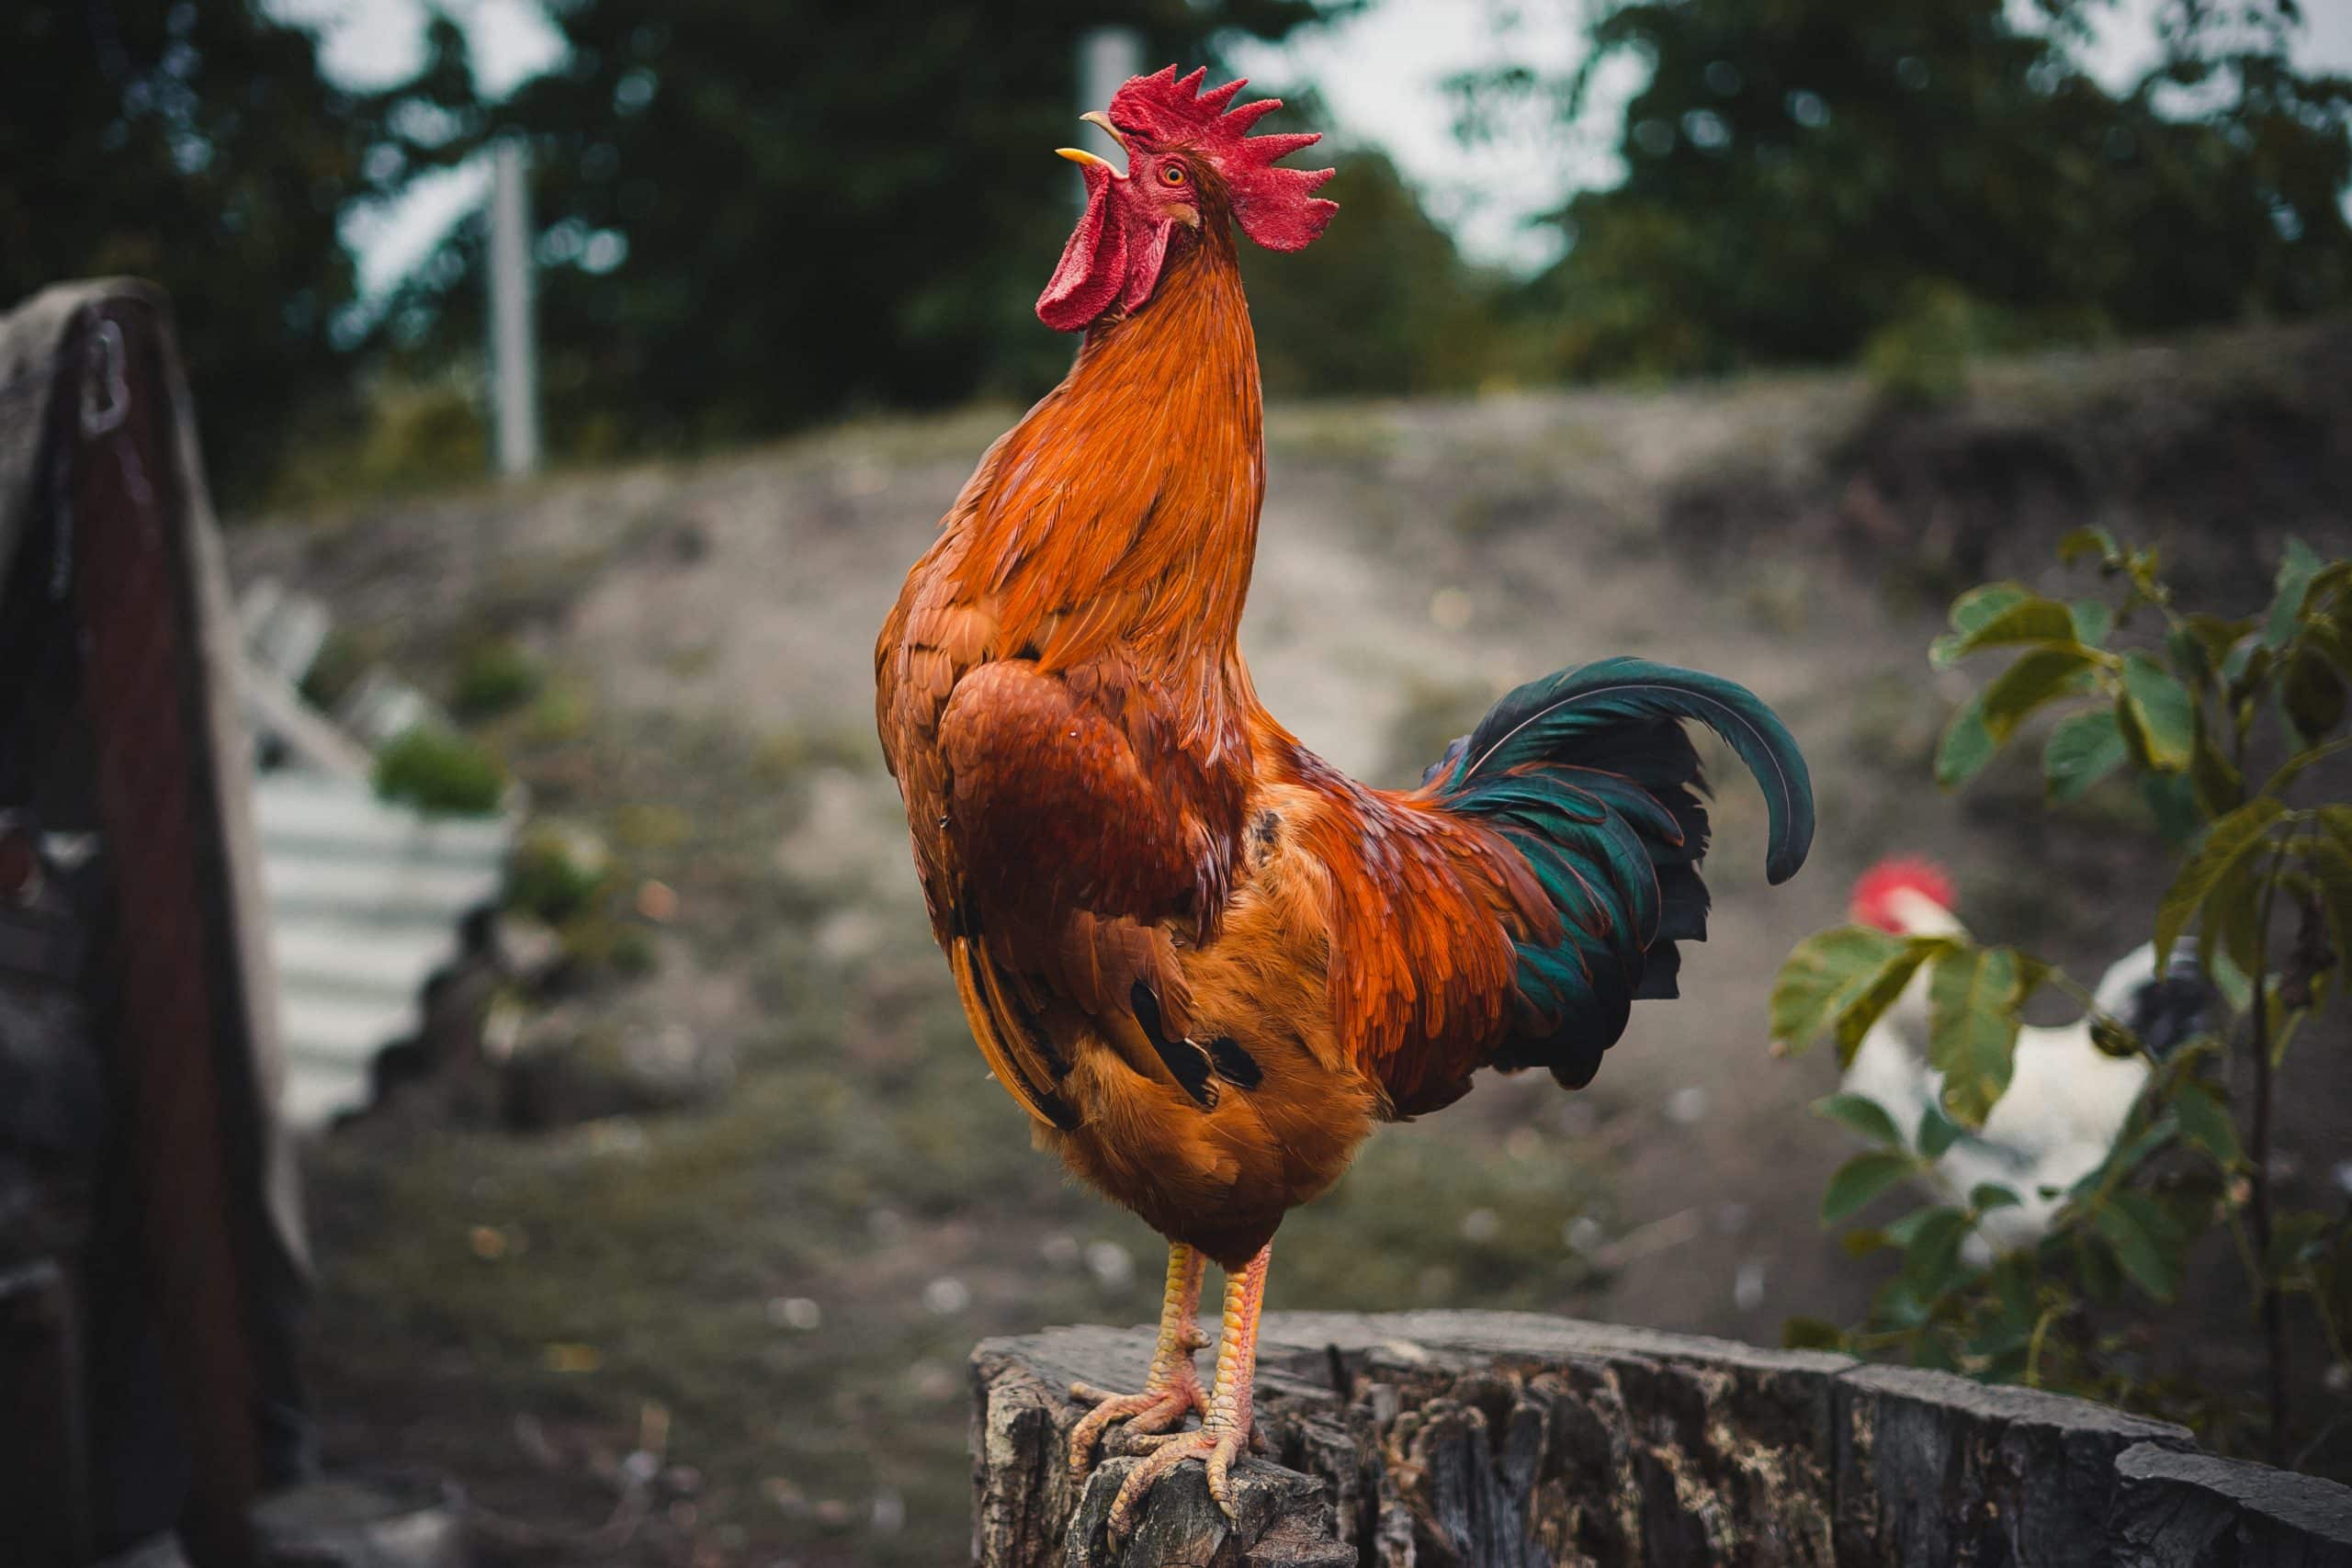 Taming That Tyrant Rooster - Keeping your Hens Safe from an